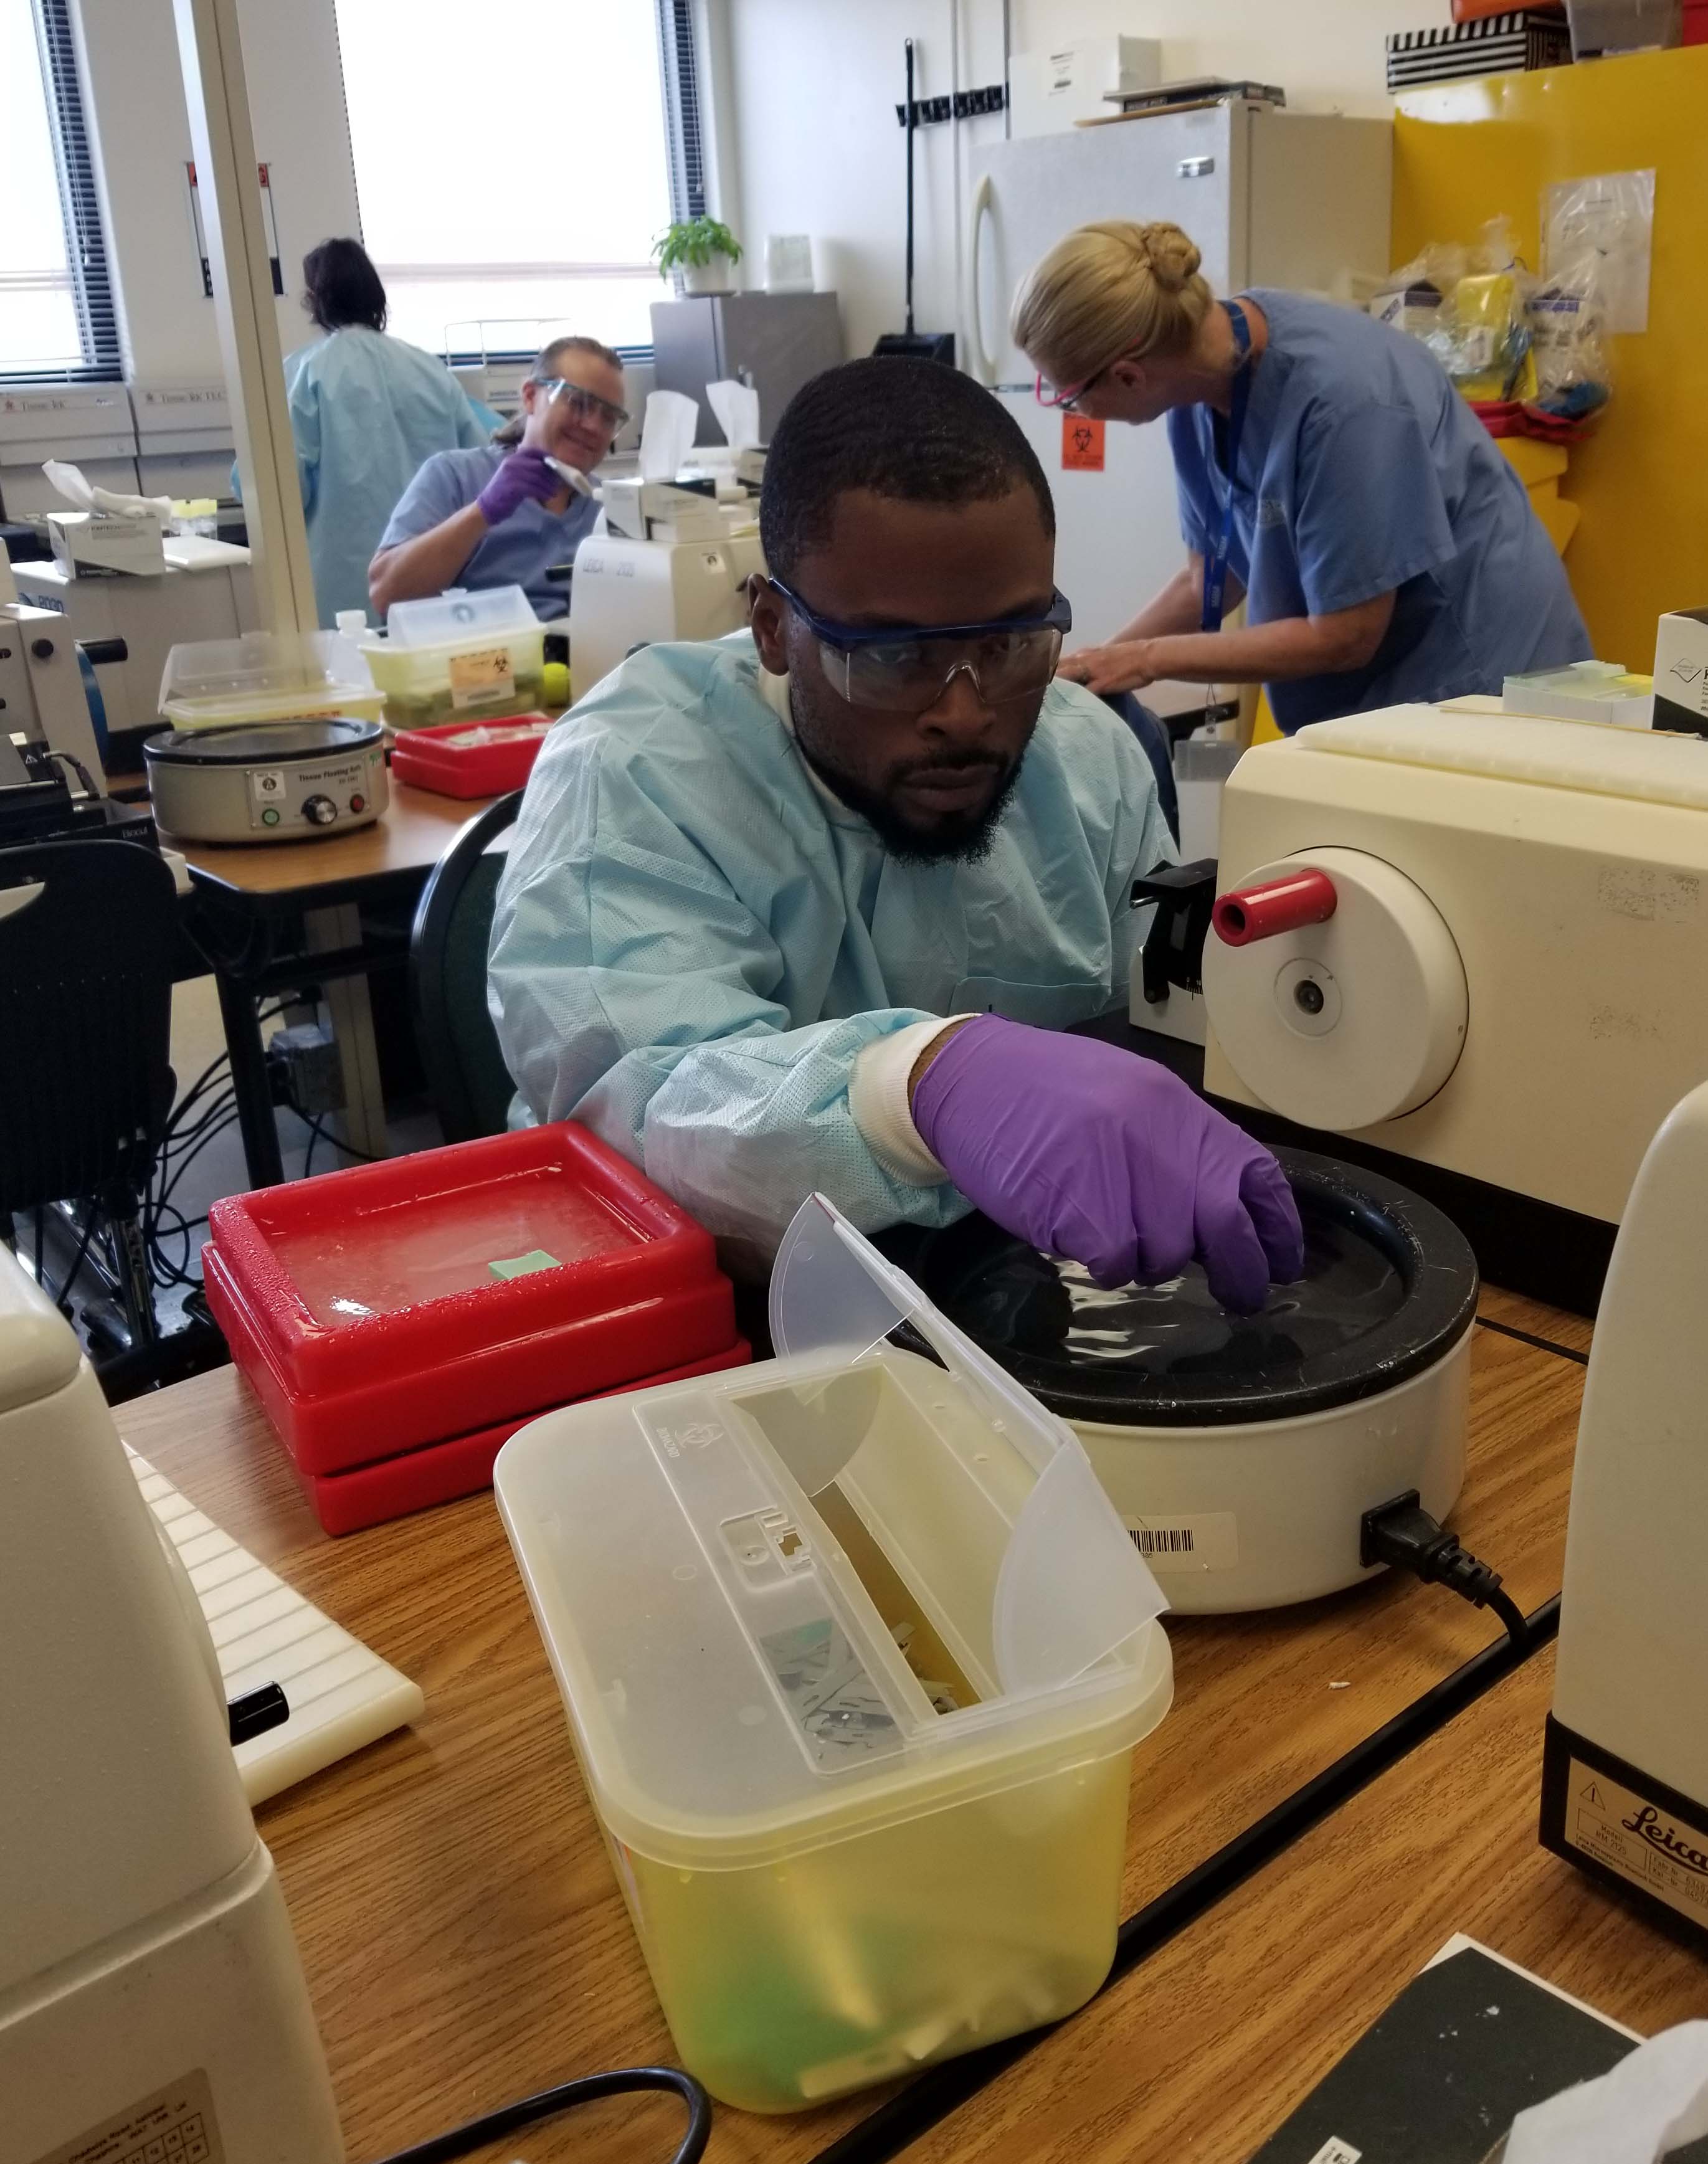 Orlando Campus Histotechnology Students One-Step Closer to Becoming ‘Disease Detectives’